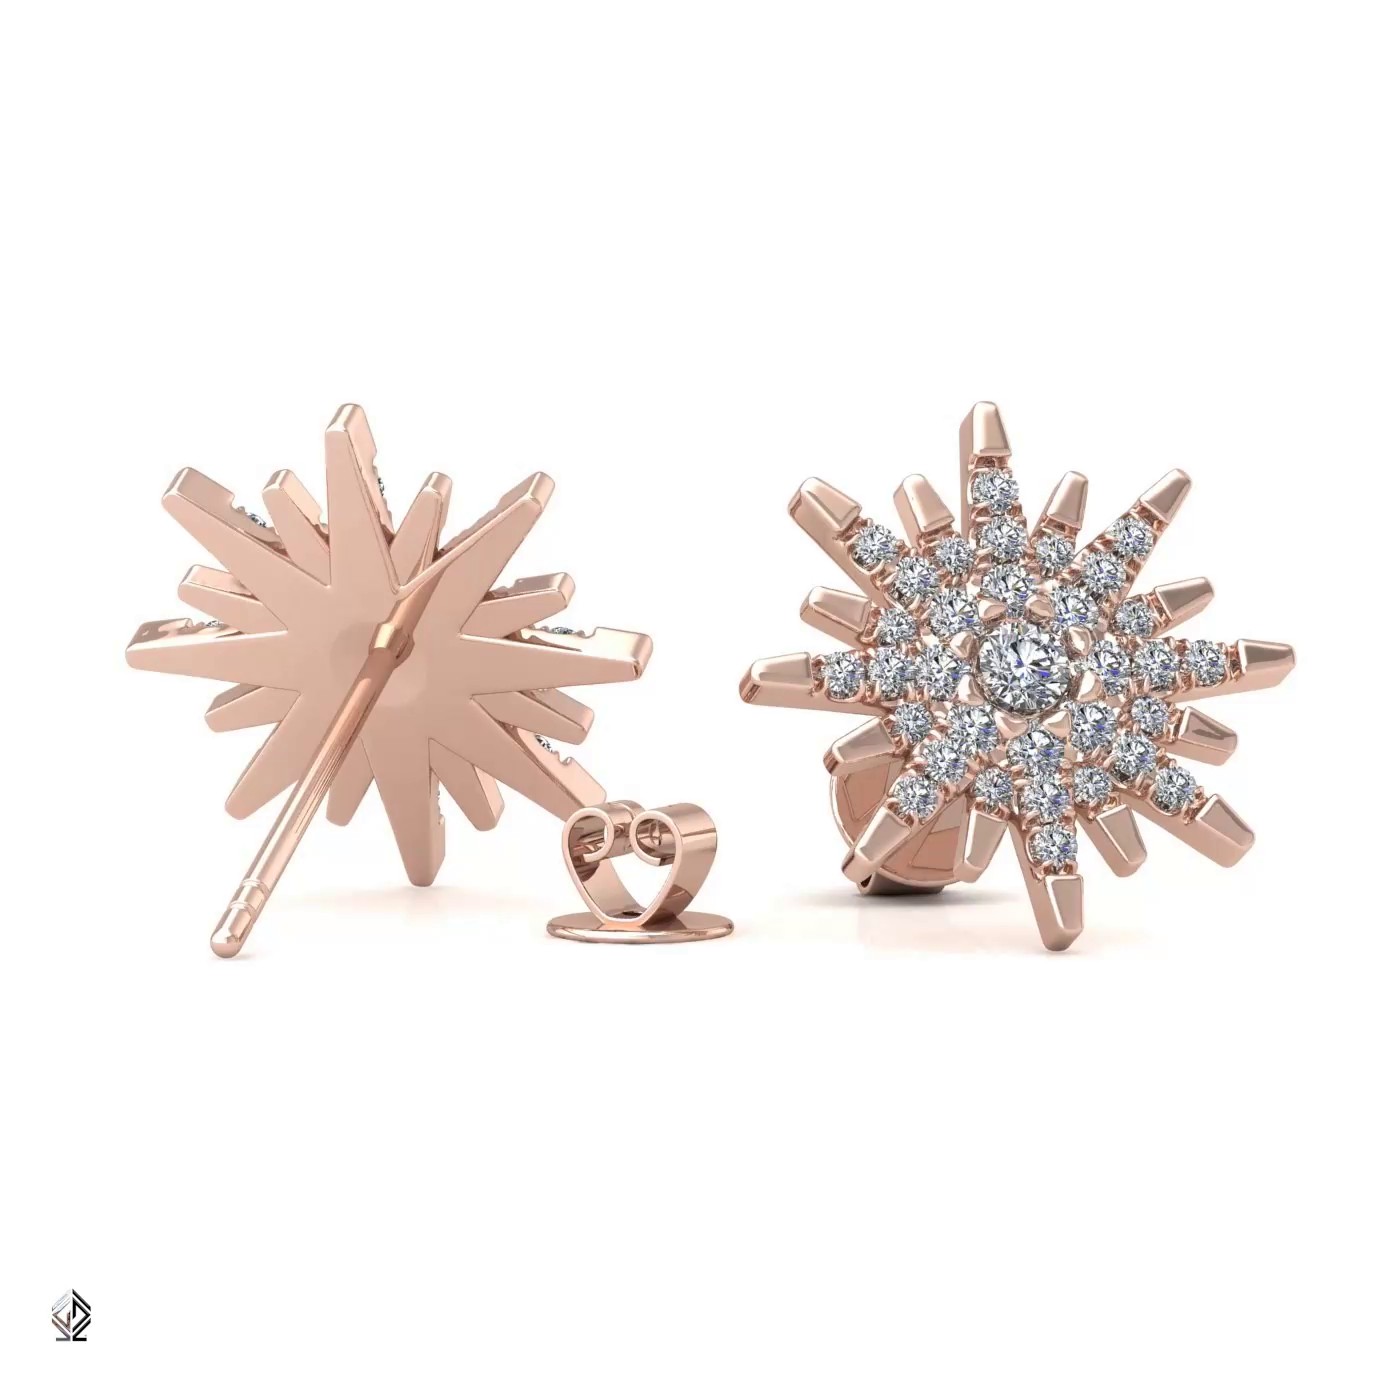 18k rose gold  "you are the sun" diamond earrings 0.18 ct Photos & images